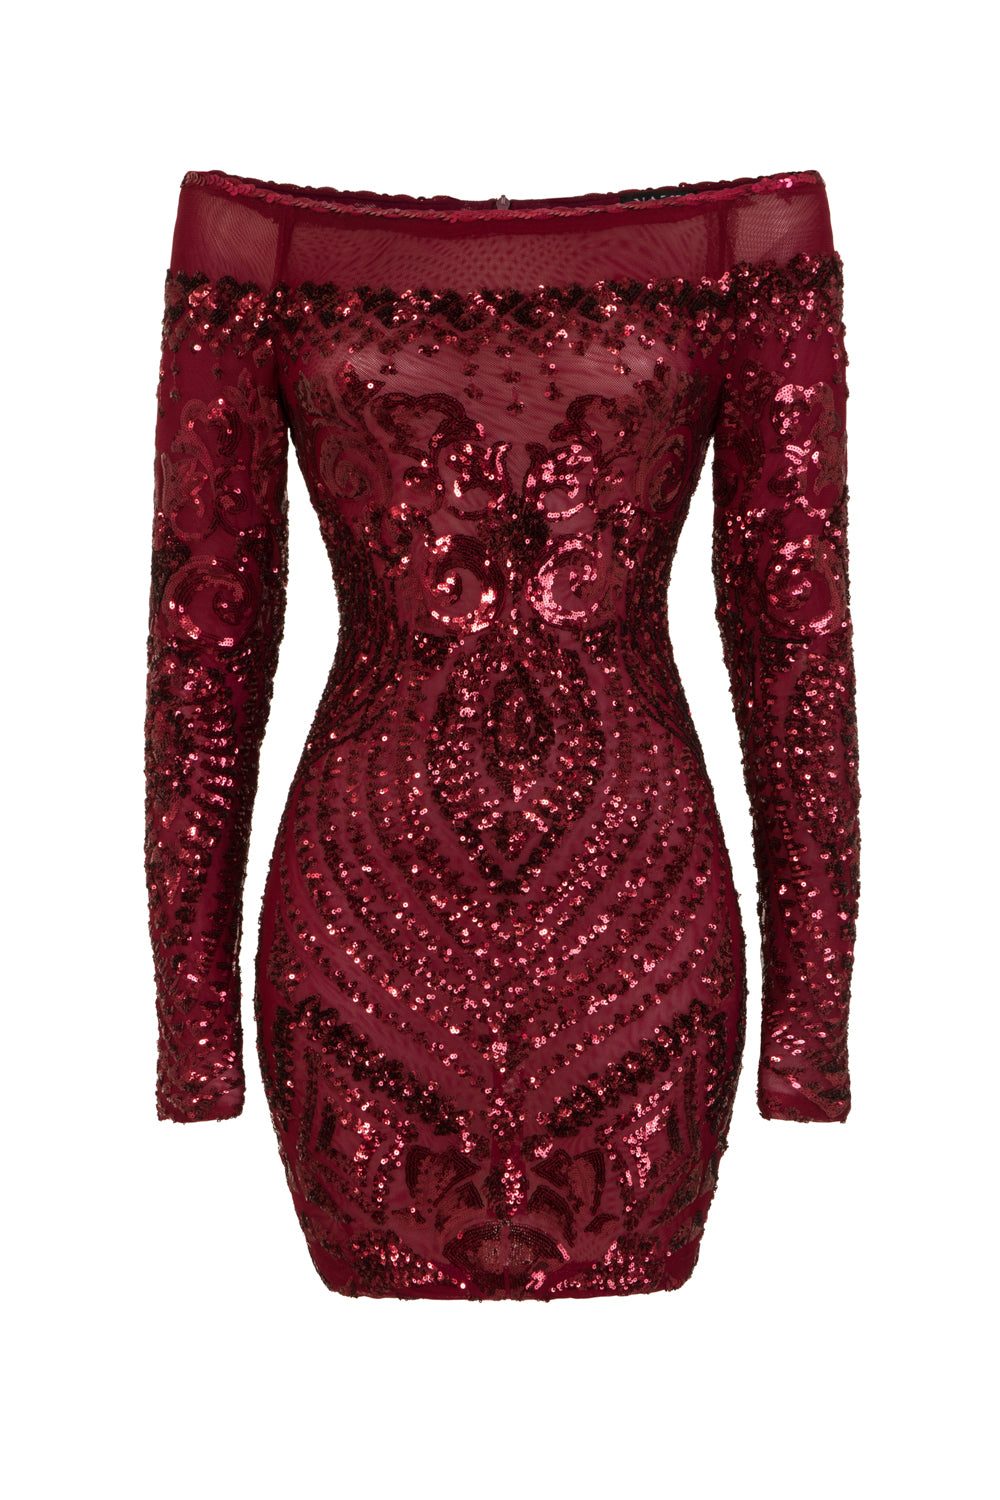 Iliana Berry Luxe Sequin Embellished Off The Shoulder Dress